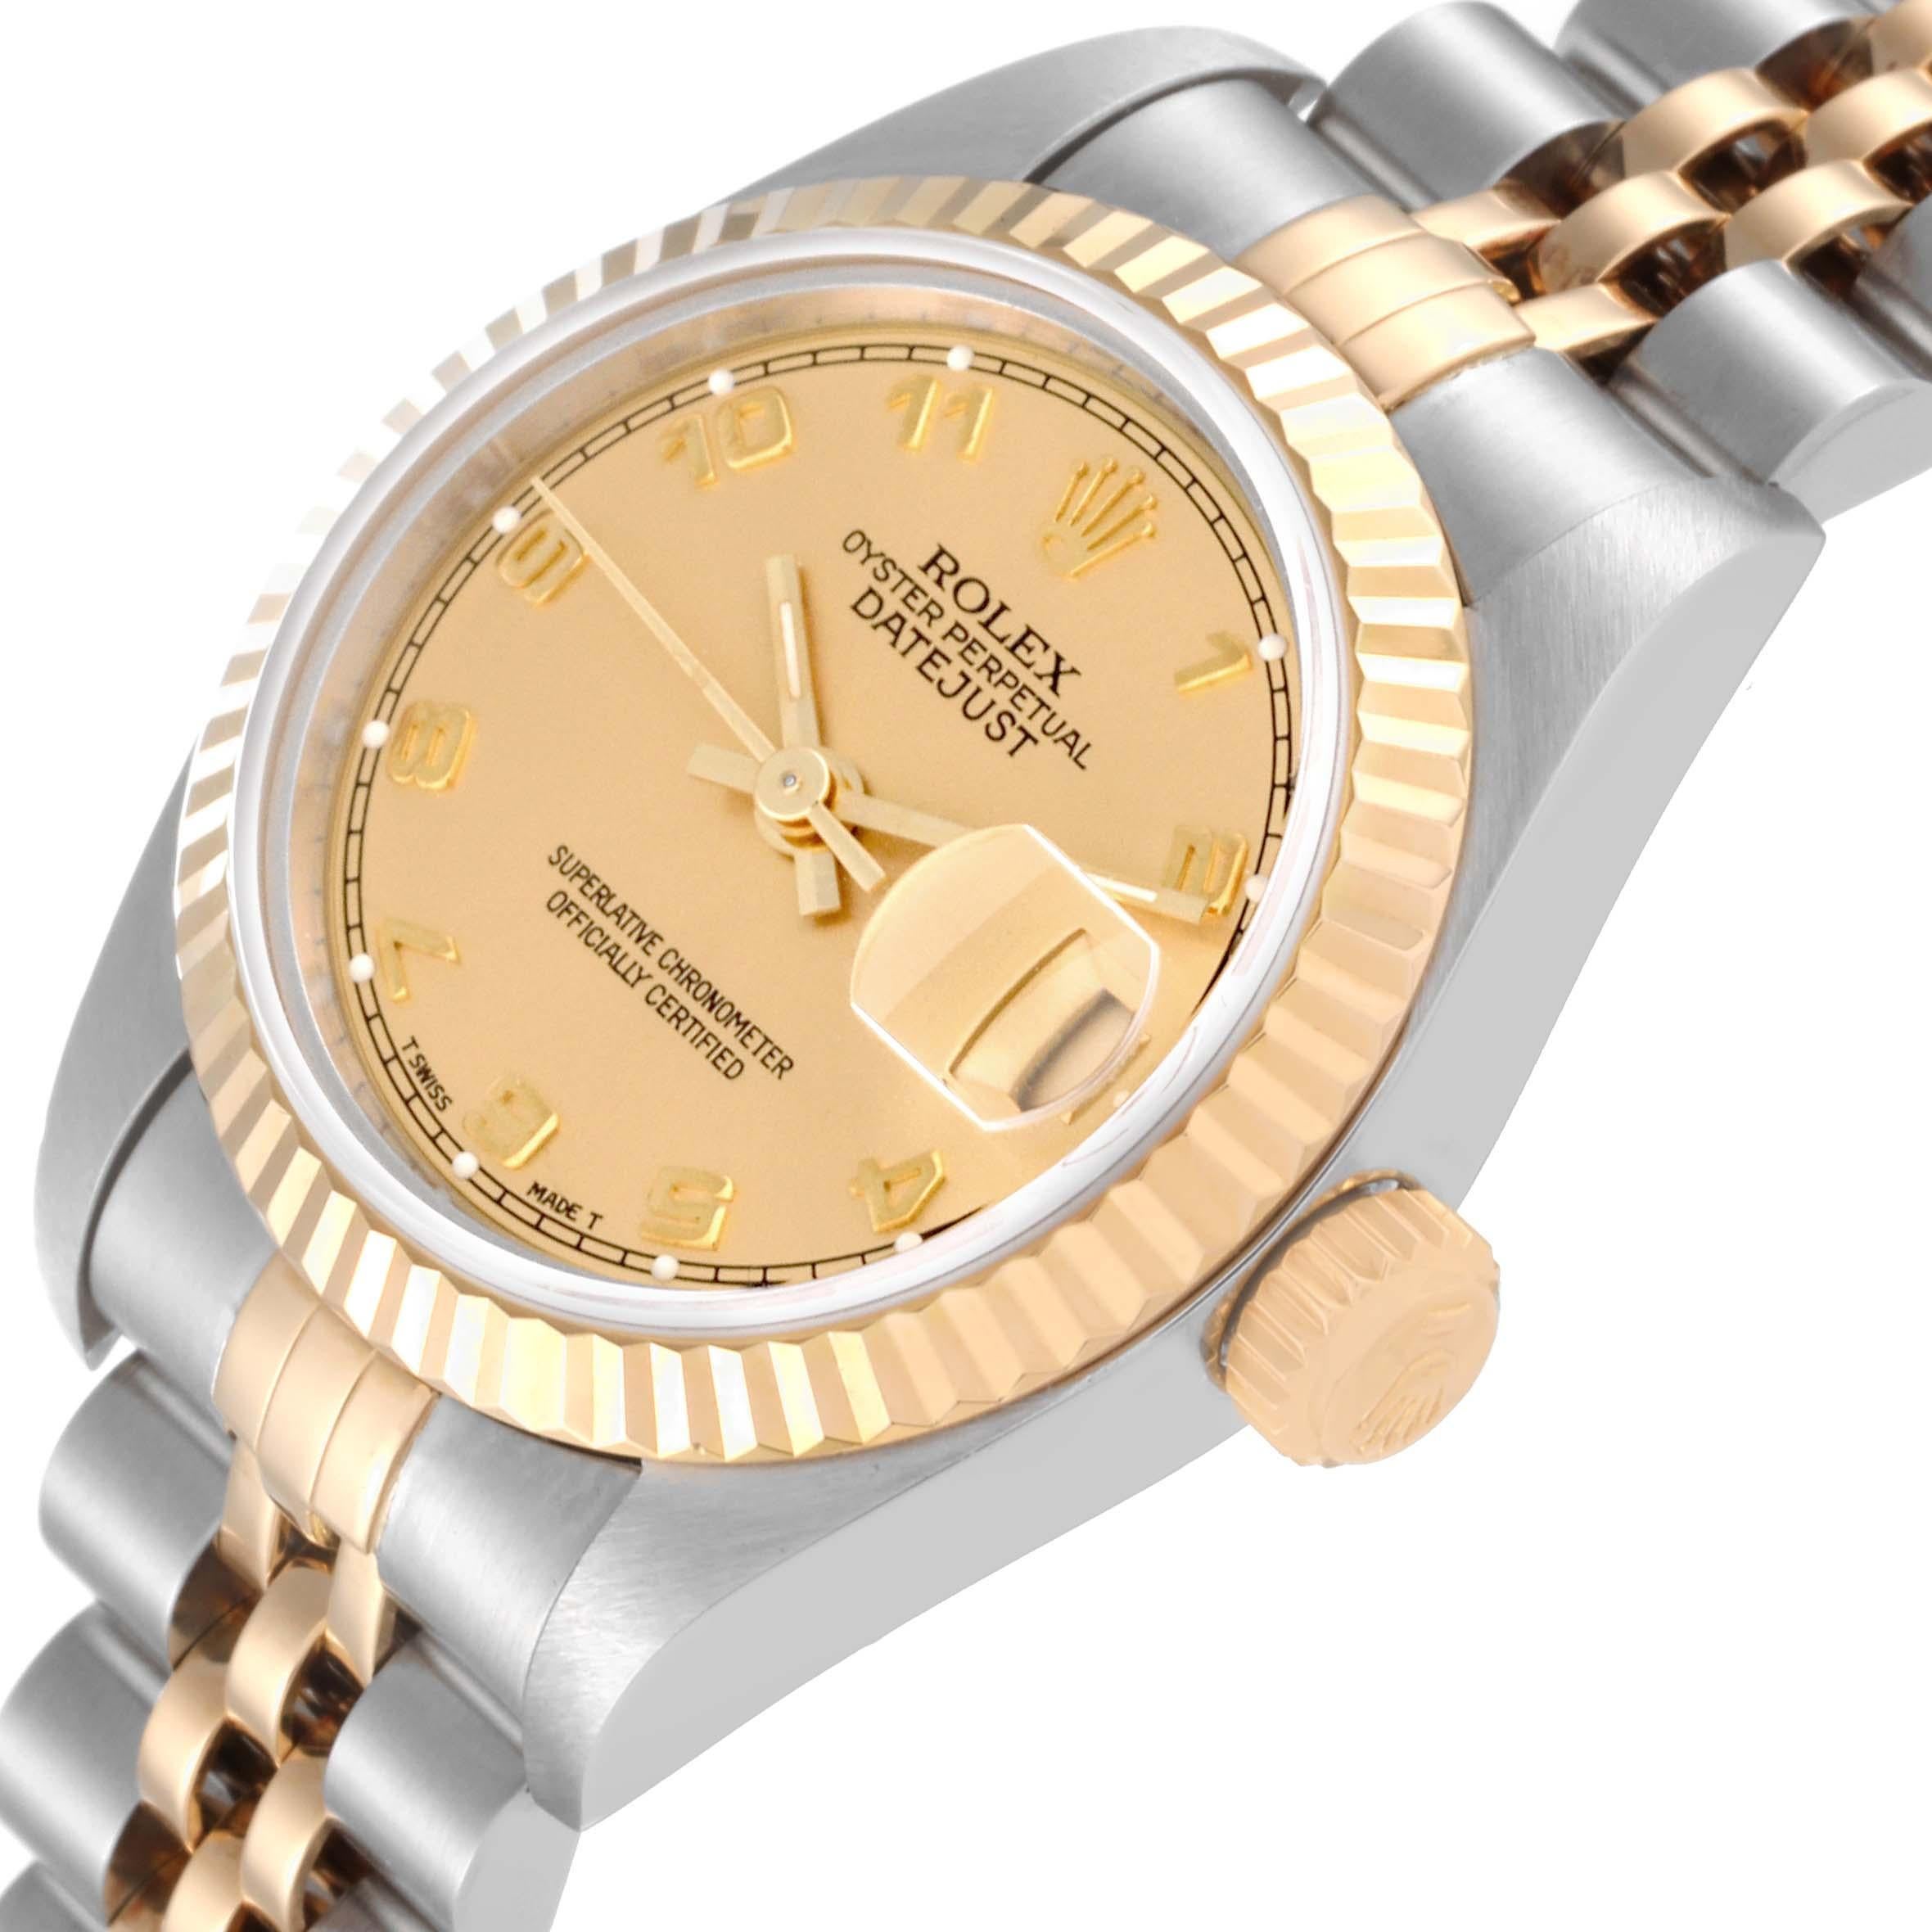 Rolex Datejust Steel Yellow Gold Champagne Arabic Dial Ladies Watch 69173 For Sale 1